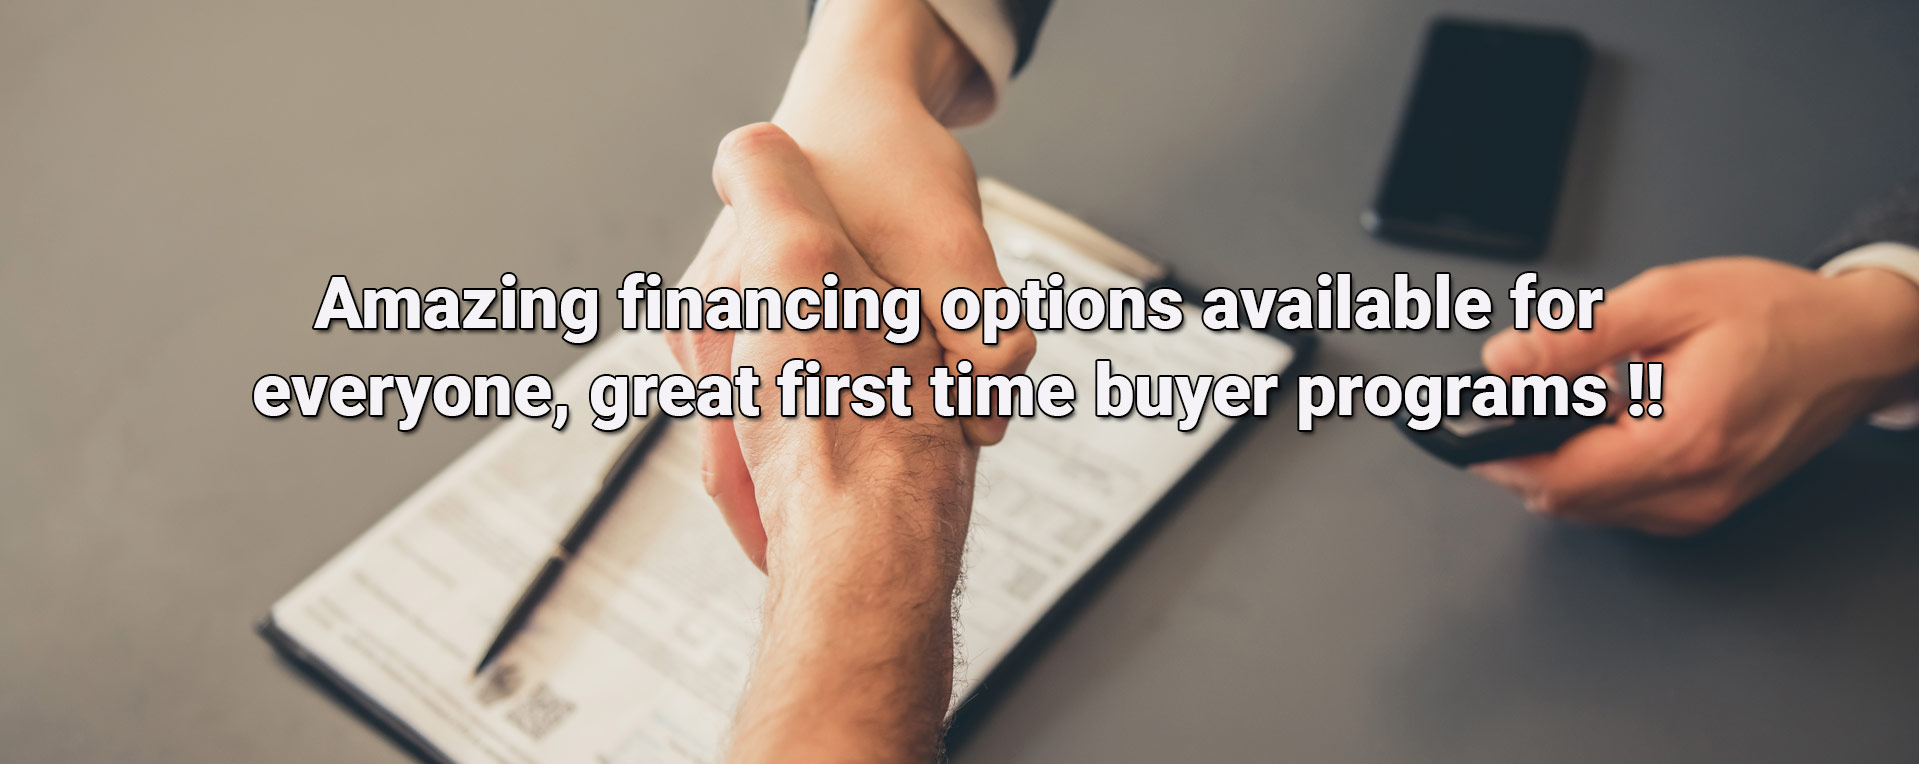 Amazing financing options available for everyone, great first time buyer programs !!